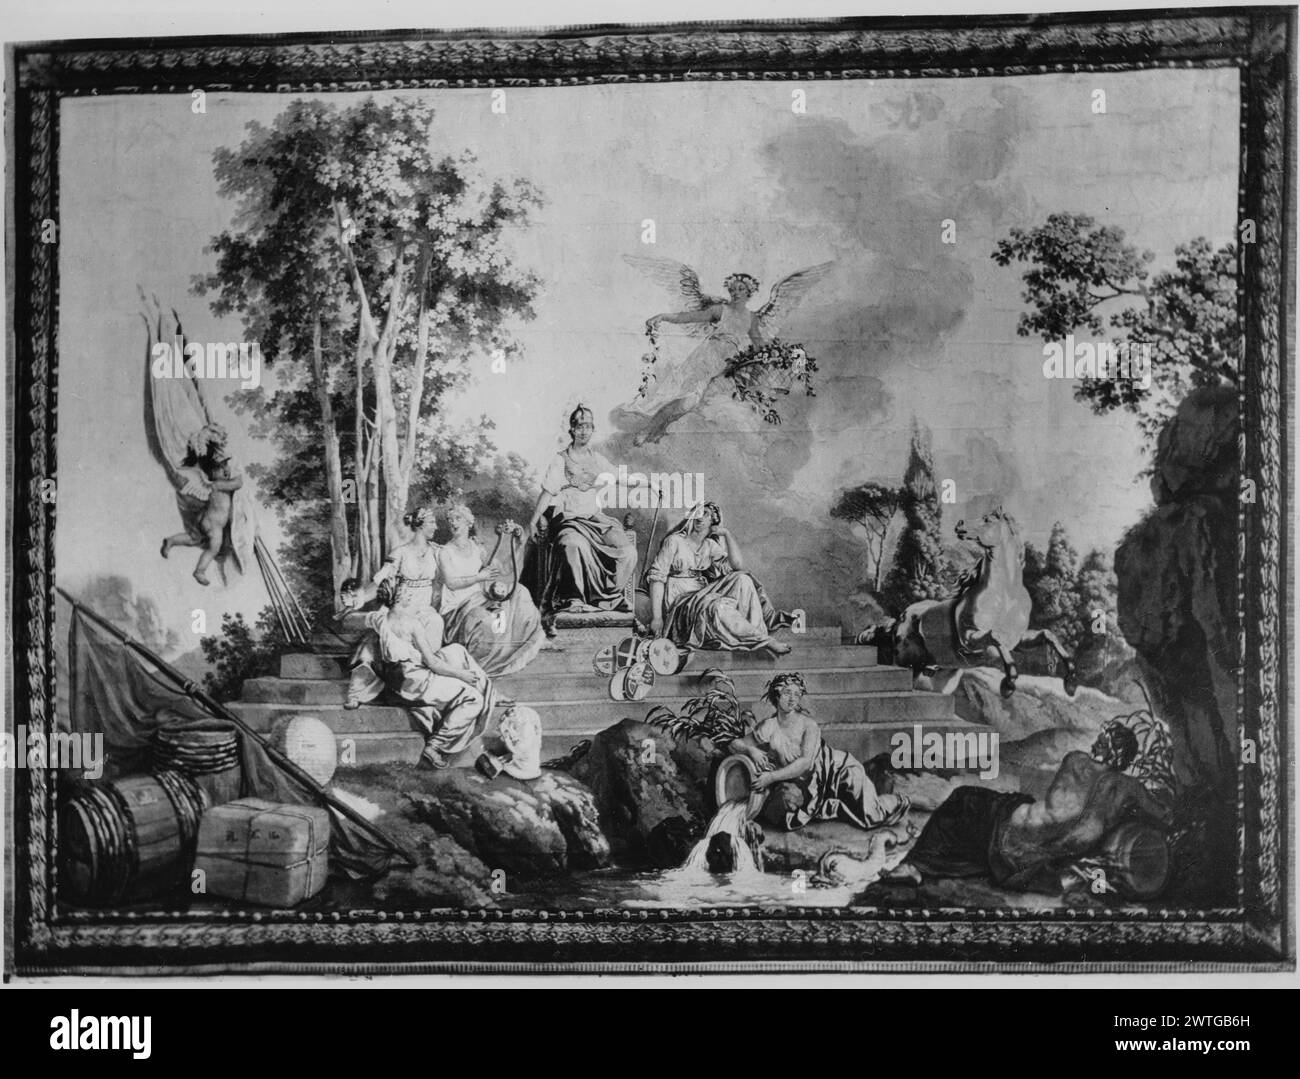 Europe. Le Barbier, Jean-Jacques-François (the Elder) (French, 1738-1826) (cartoon creator) [painter] De Menou (French, act. 1780-1793) (workshop) [weaver] c. 1790-1791 Tapestry Dimensions: H 12' x W 15' Tapestry Materials/Techniques: wool & silk Culture: French Weaving Center: Beauvais Ownership History: Woven for Louis XVI, between 4/1790 & 11/1791. Delivered to Abraham Alcan, 9/24/1796. Sold in Paris, from the hôtel of the duc de Richelieu 5/18/1852; purchased by Prince de Béarn. M. Gaston Menier, 1893. Sold at Sotheby's, 12/13/1974, lot 55, London. Artemis S.A., Brussels, 1975. Purchased b Stock Photo